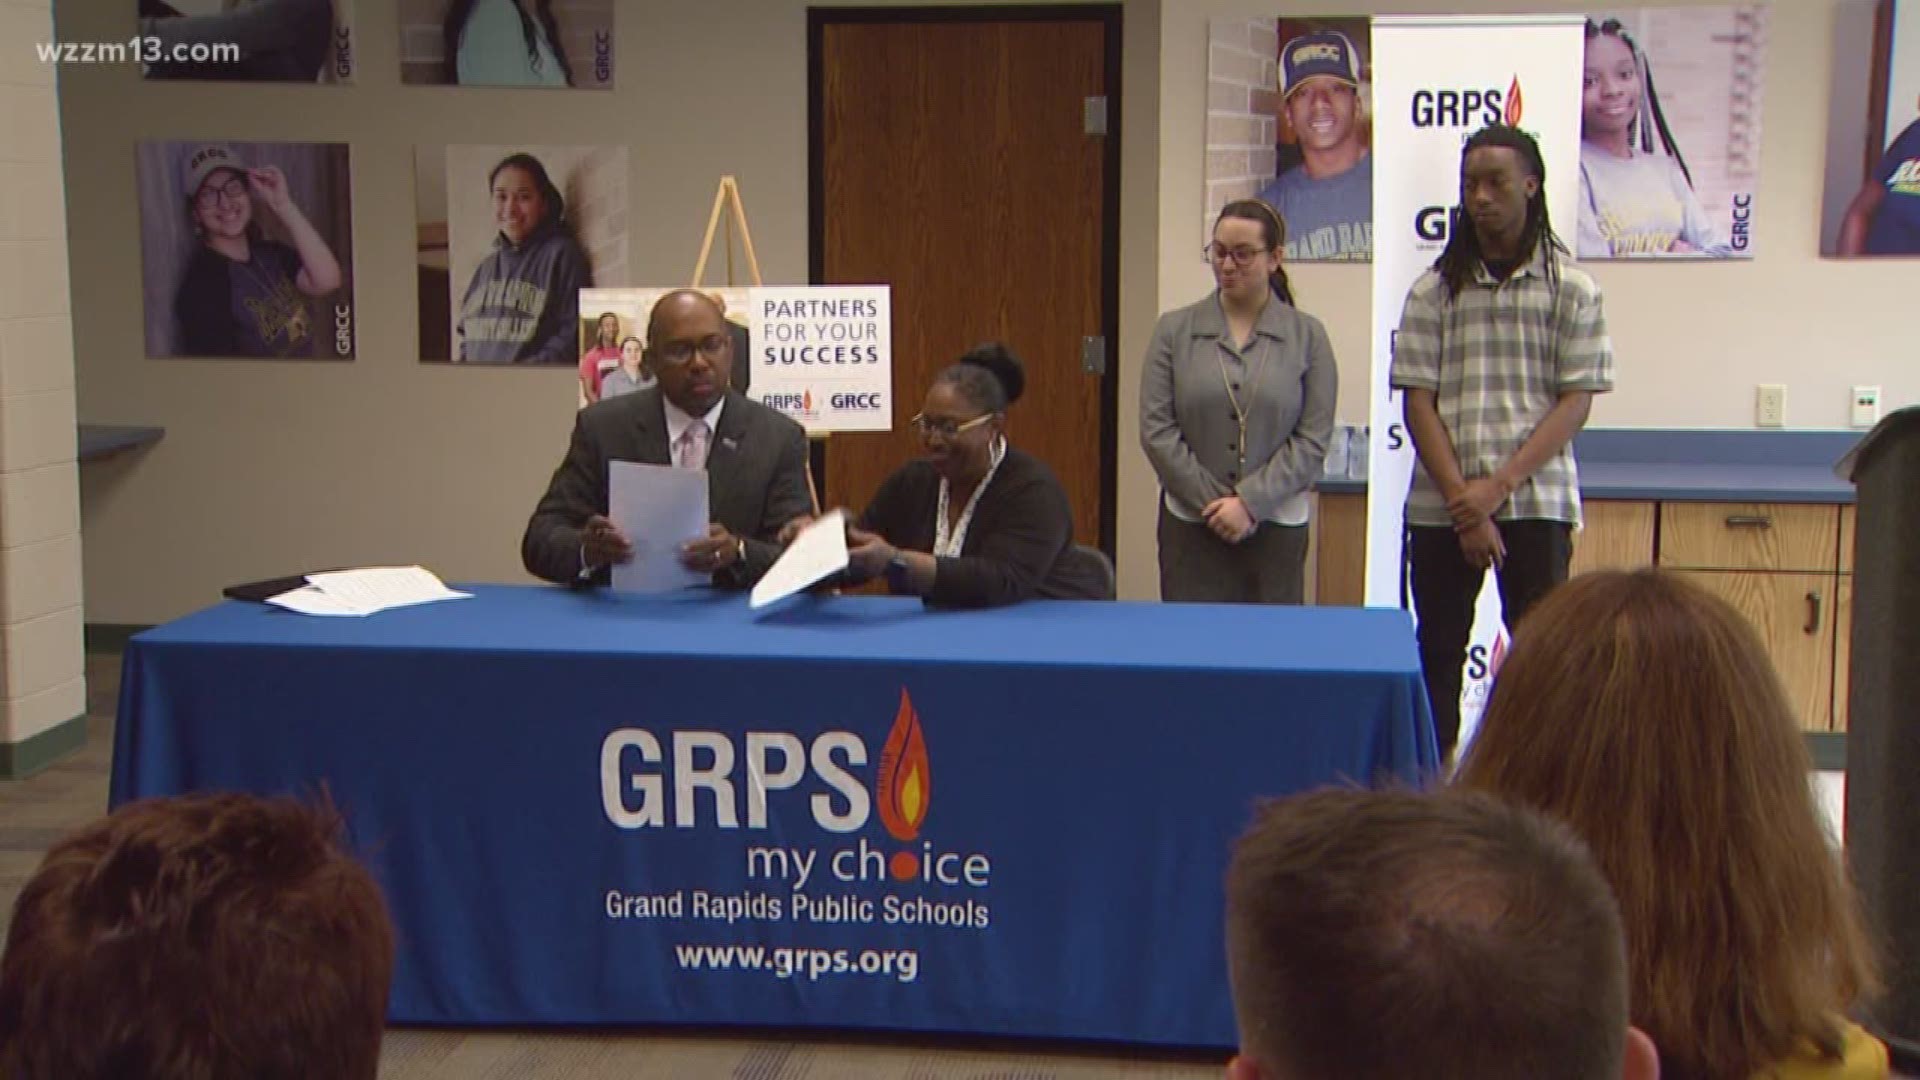 GRPS and GRCC extend partnership